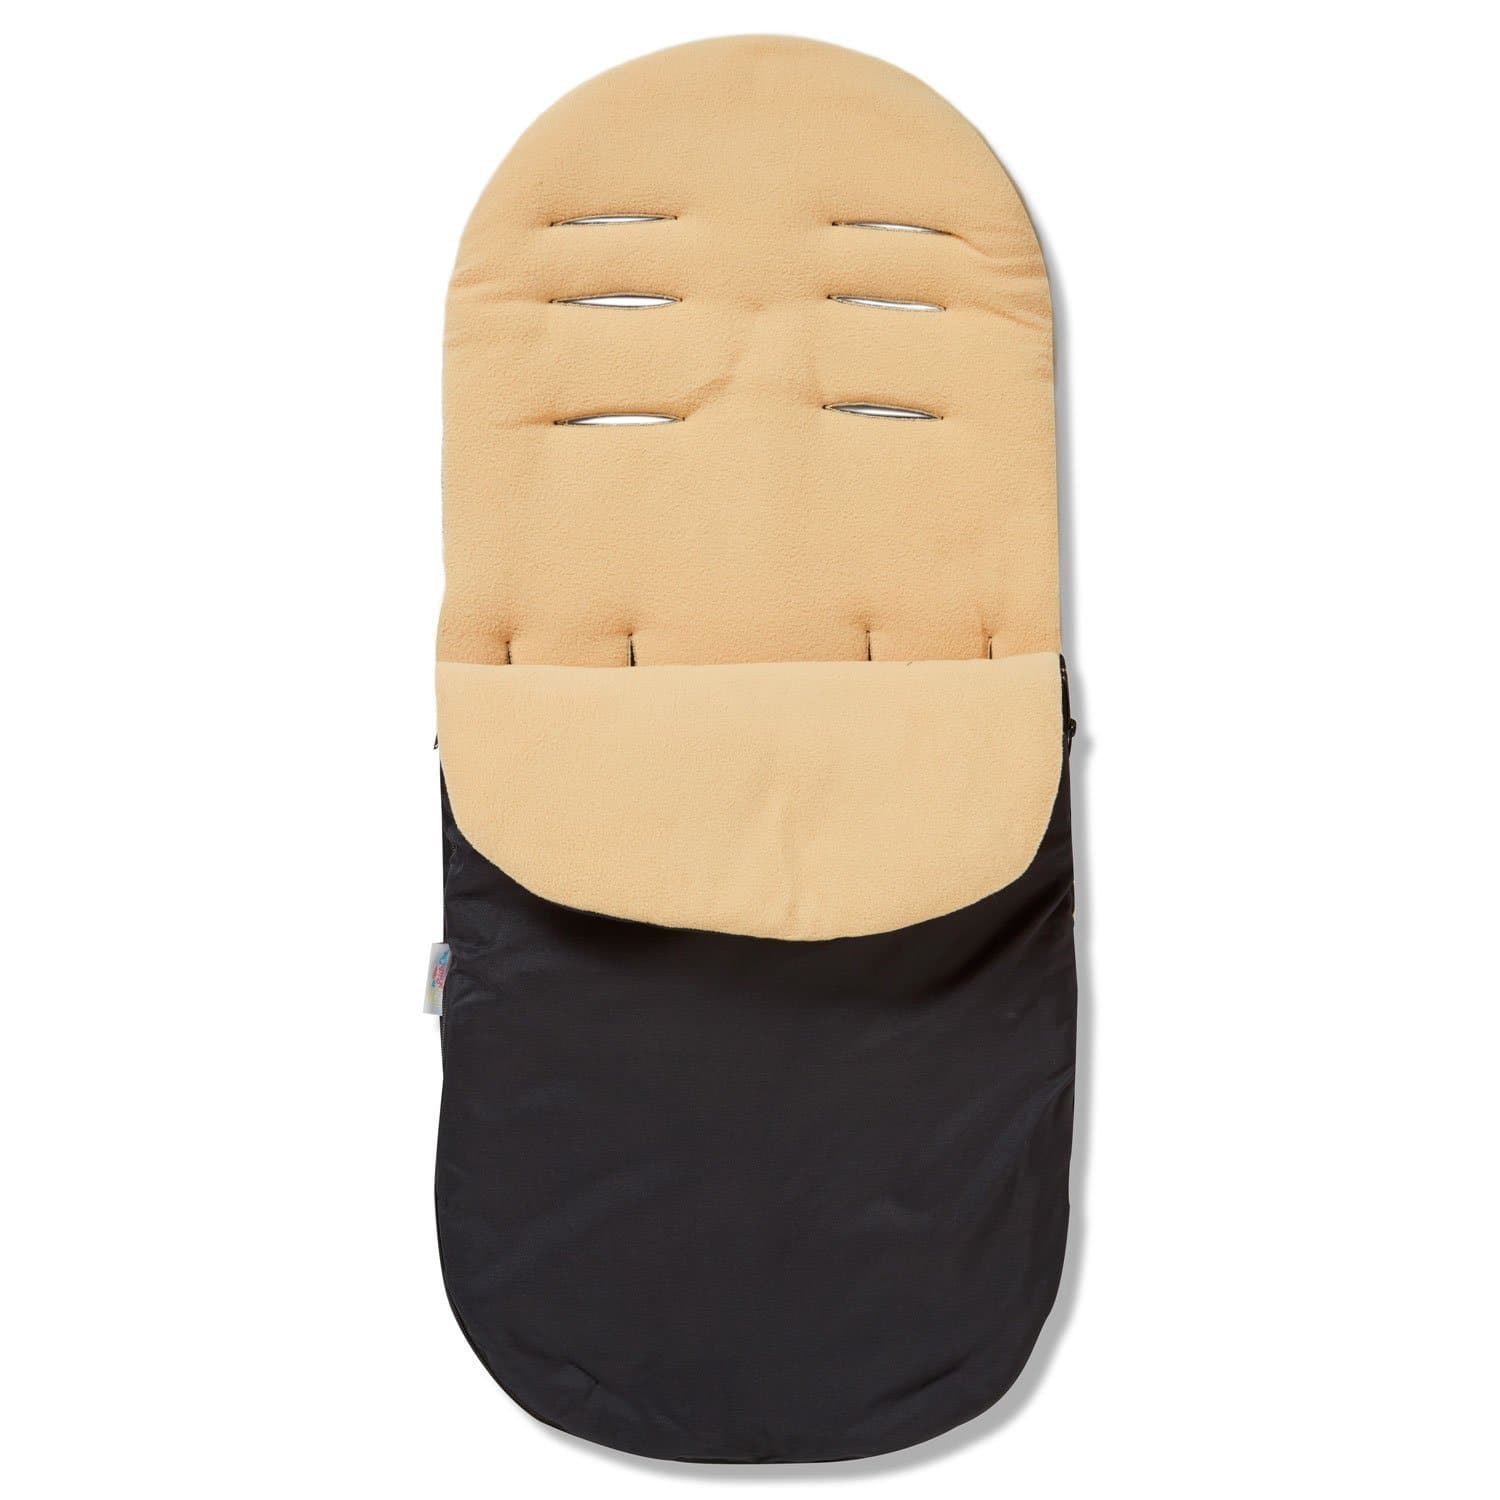 Footmuff / Cosy Toes Compatible with Babyzen - Sand / Fits All Models | For Your Little One